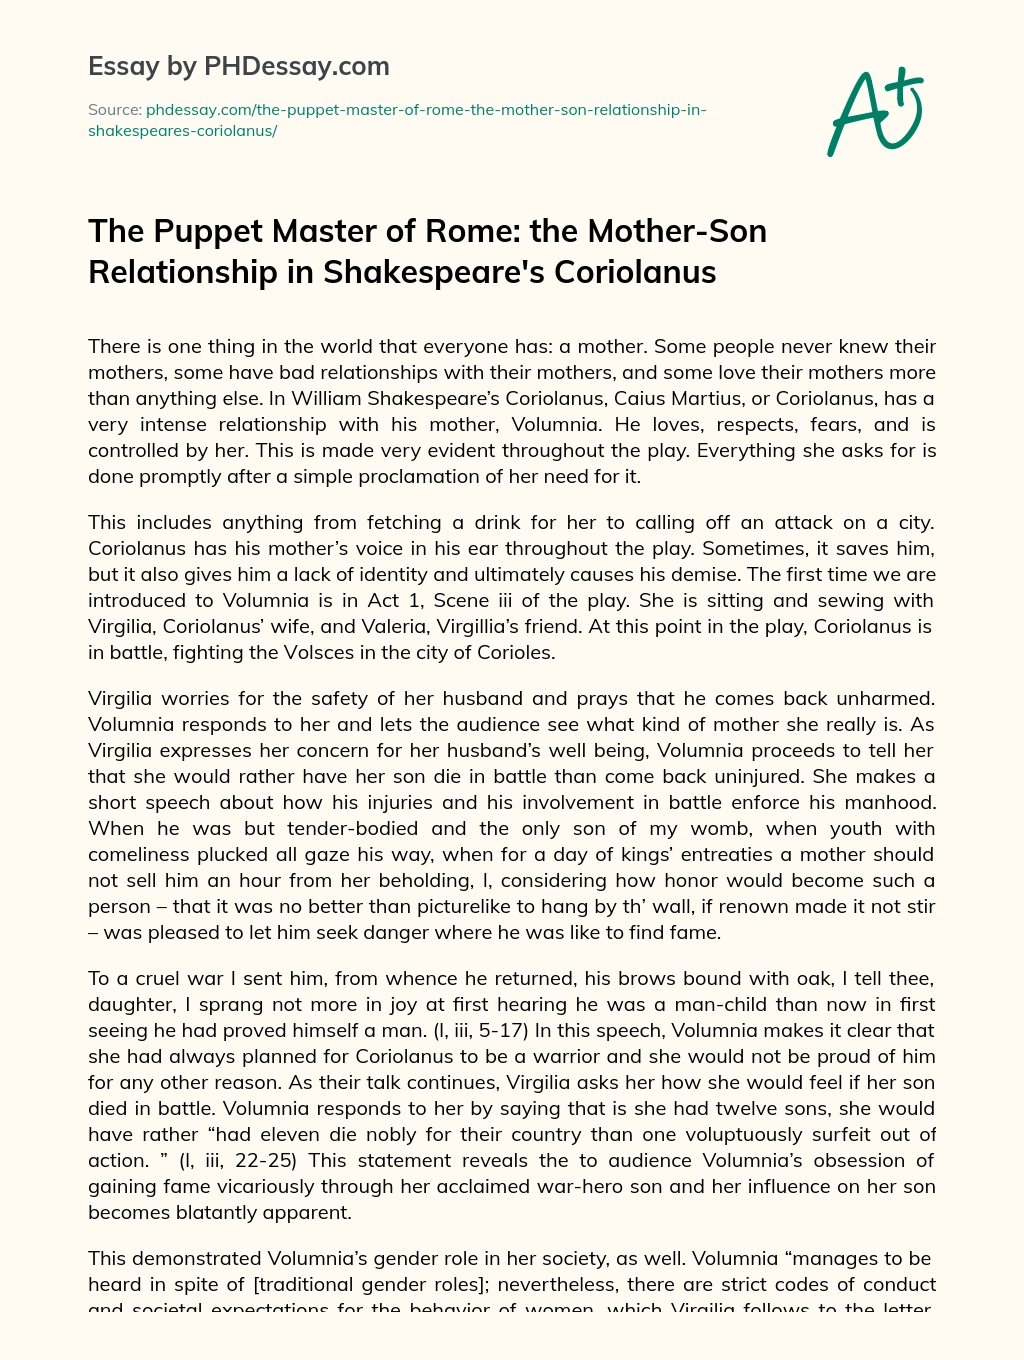 The Puppet Master of Rome: the Mother-Son Relationship in Shakespeare’s Coriolanus essay